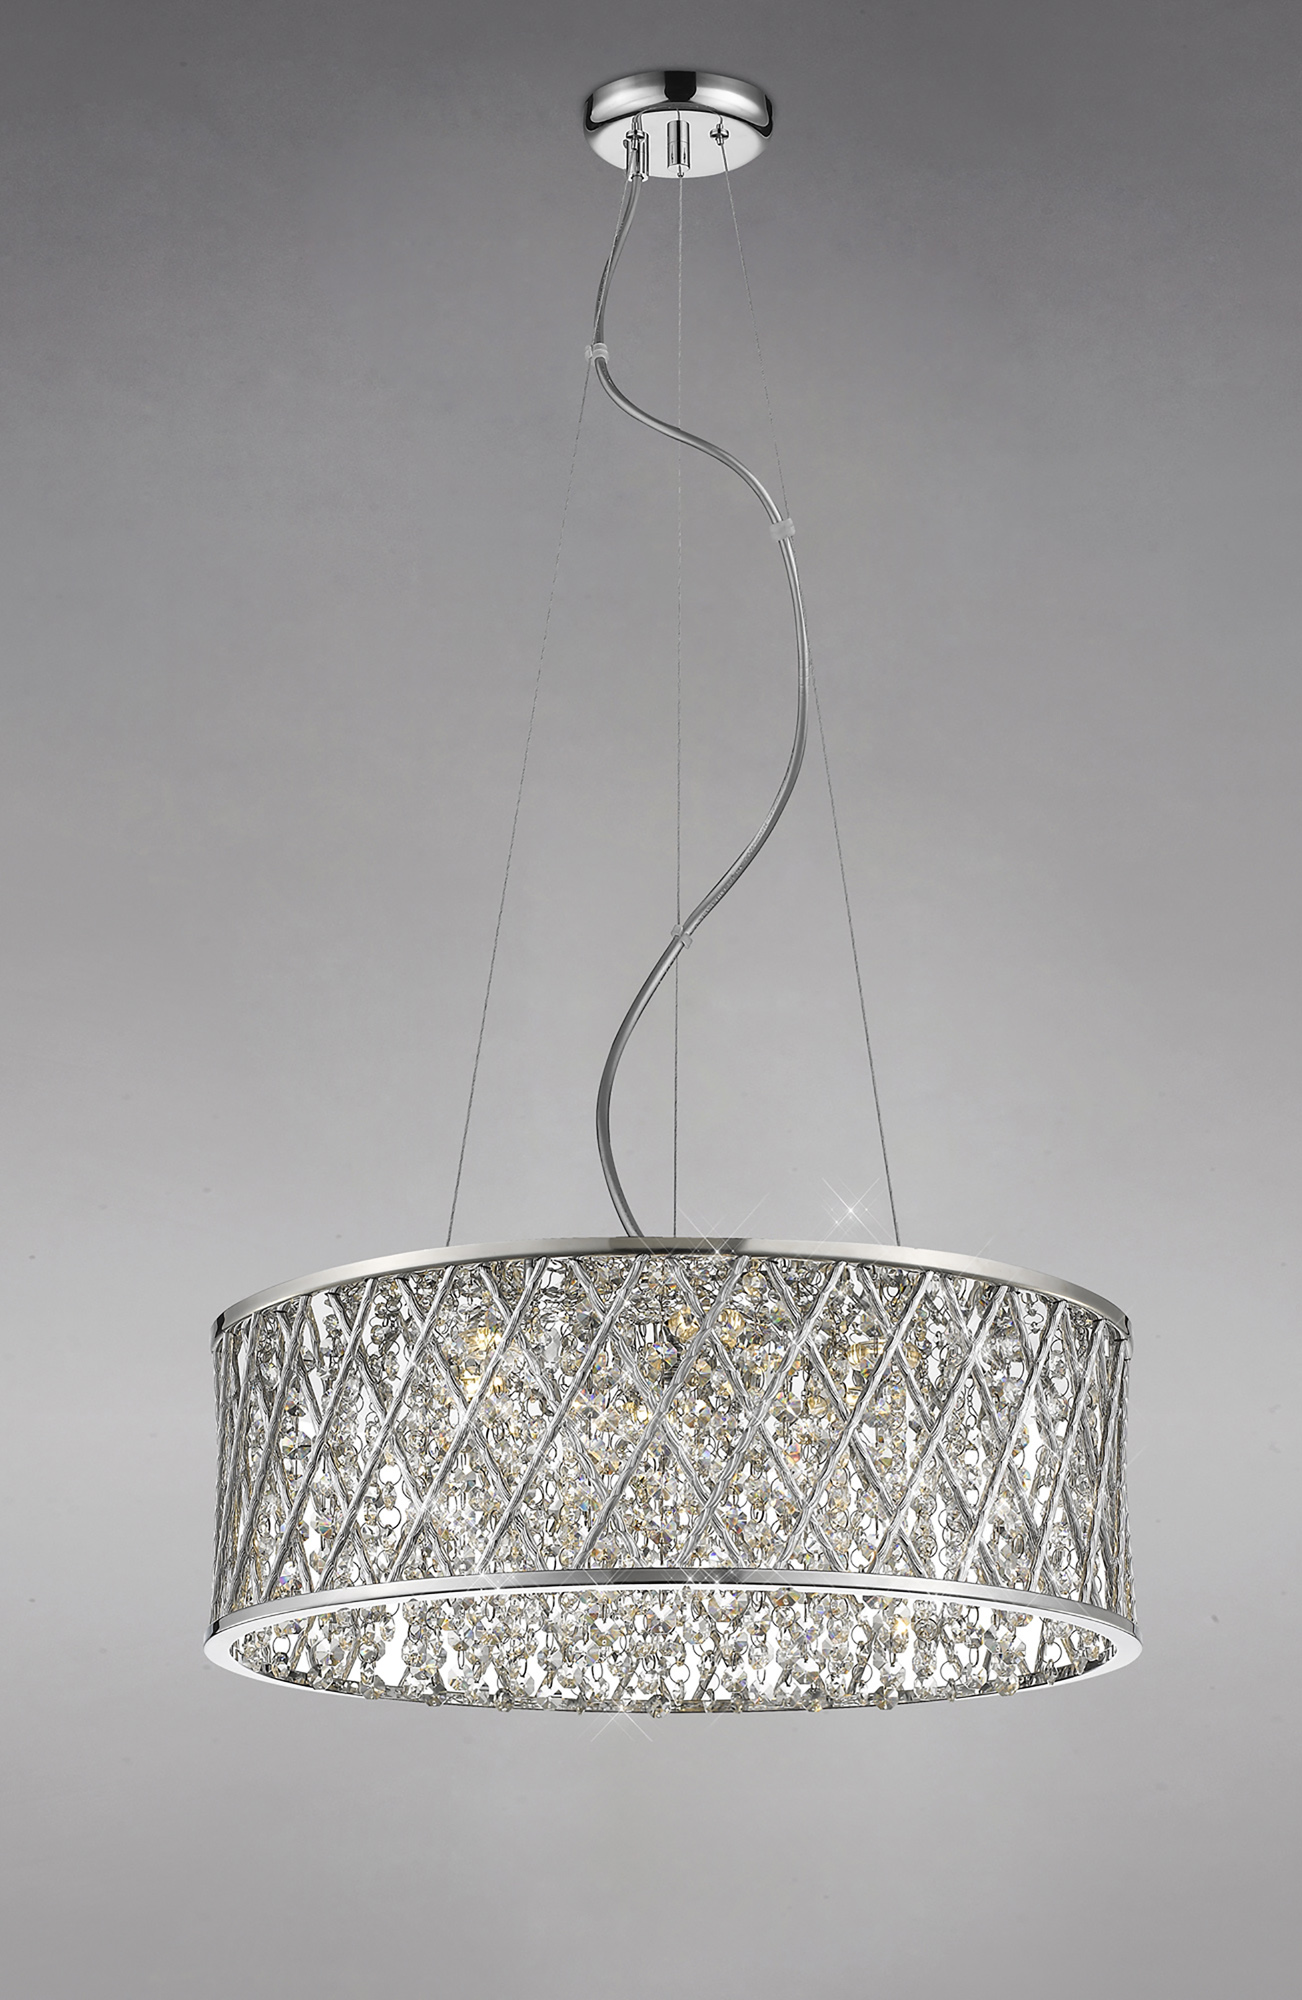 Destello Crystal Ceiling Lights Mantra Fusion Shaded Crystal Fittings